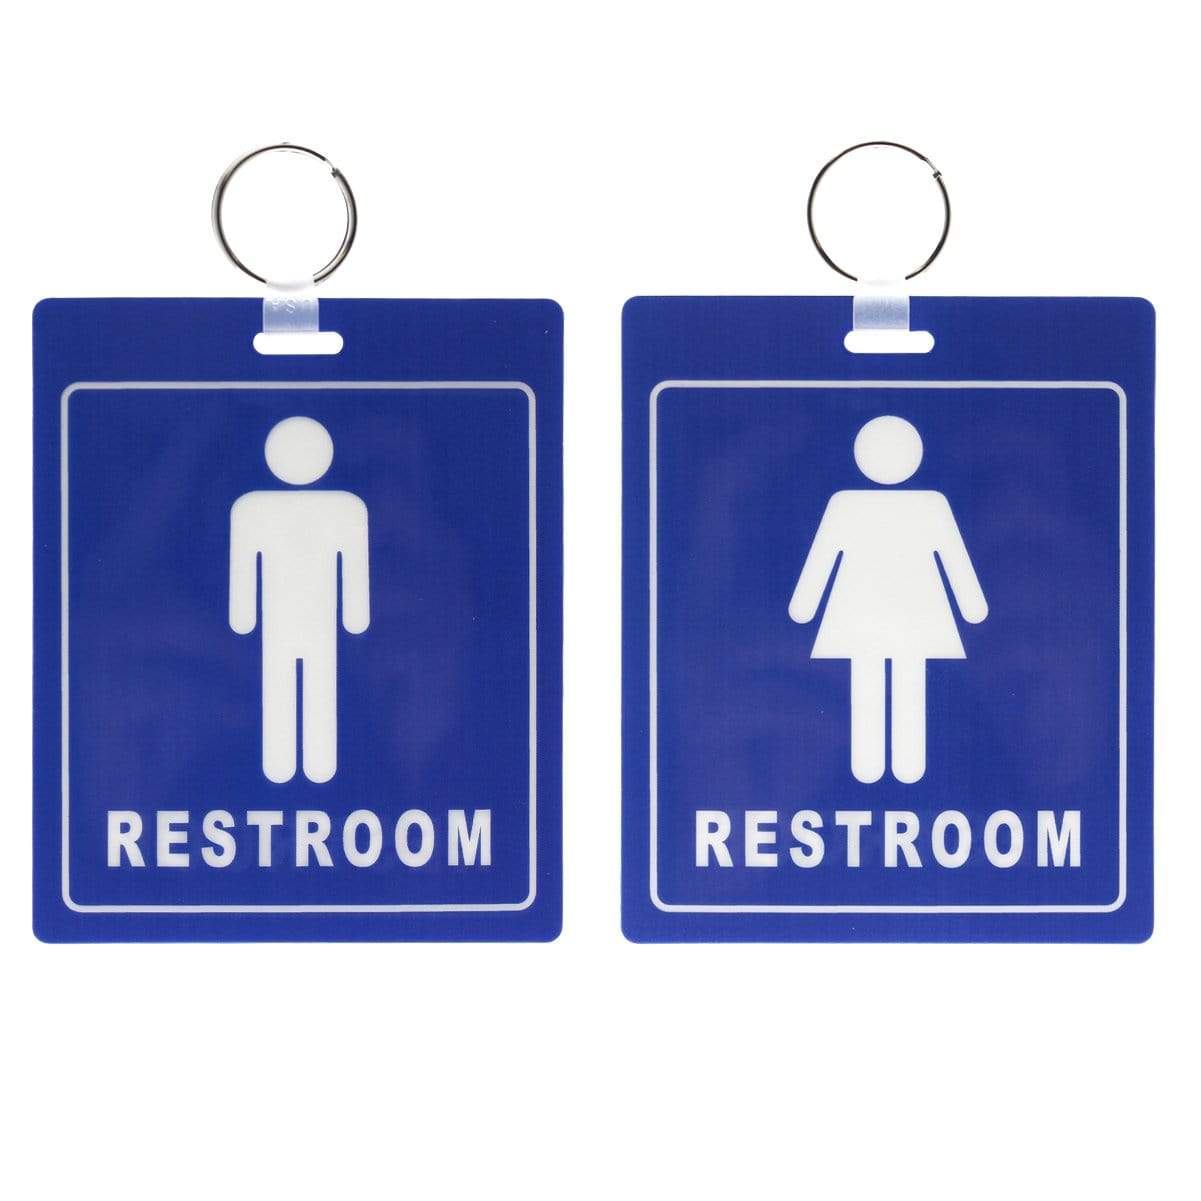 2 Pack Restroom Pass Keychain - Bathroom Tag with Key Chain Ring - Heavy Duty Large Passes for Men and Women Restrooms with Key Holder (Sold in 2 Pack) (SPID-9830-Blue) SPID-9830-BLUE-Q2